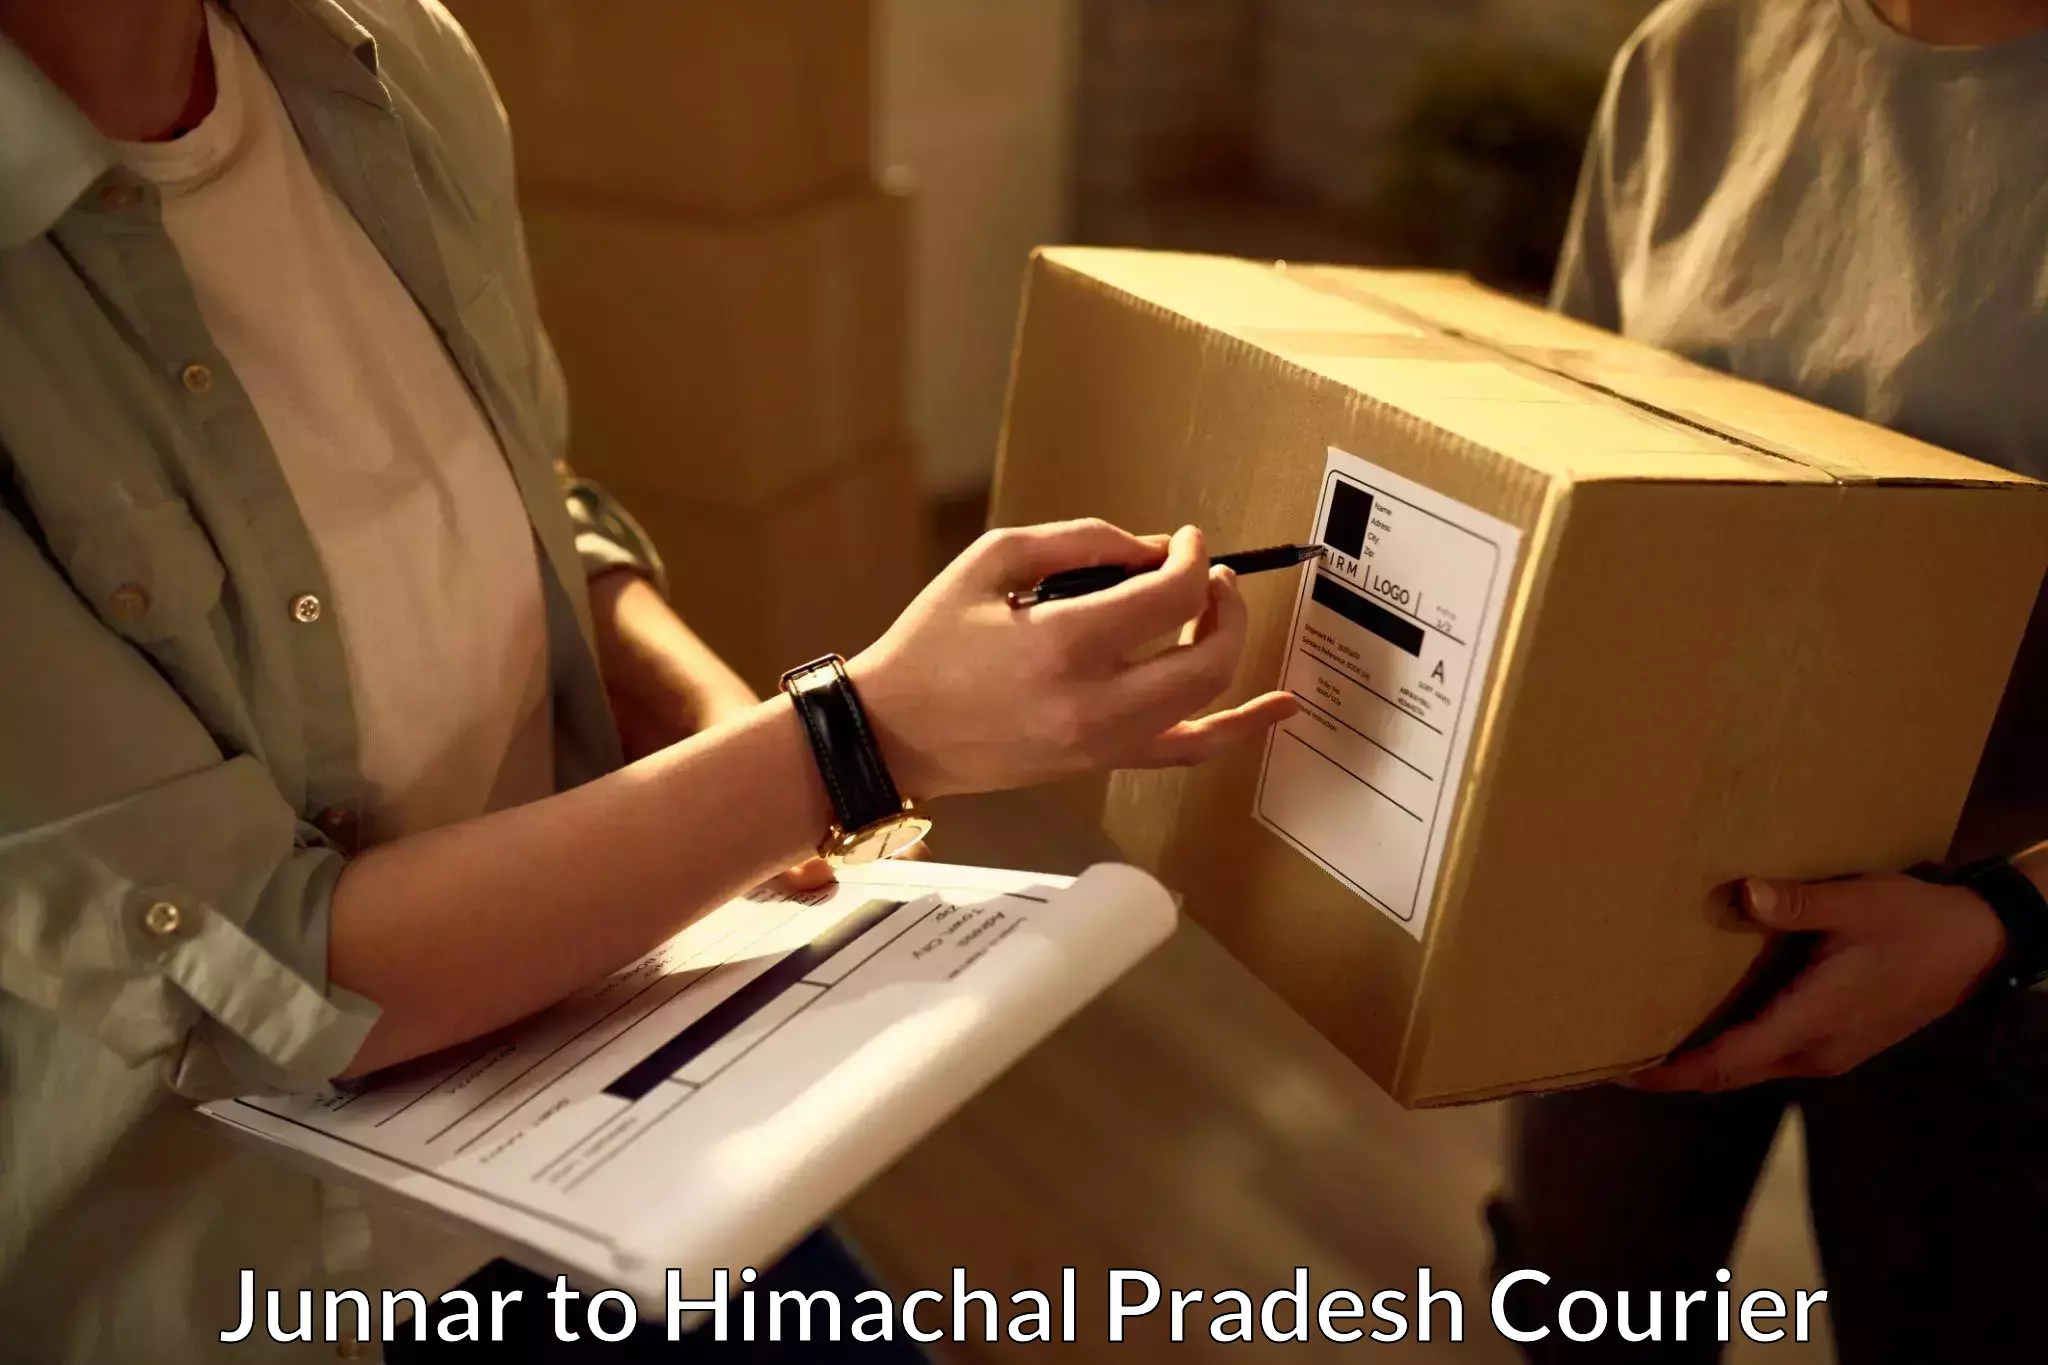 Business delivery service Junnar to Himachal Pradesh